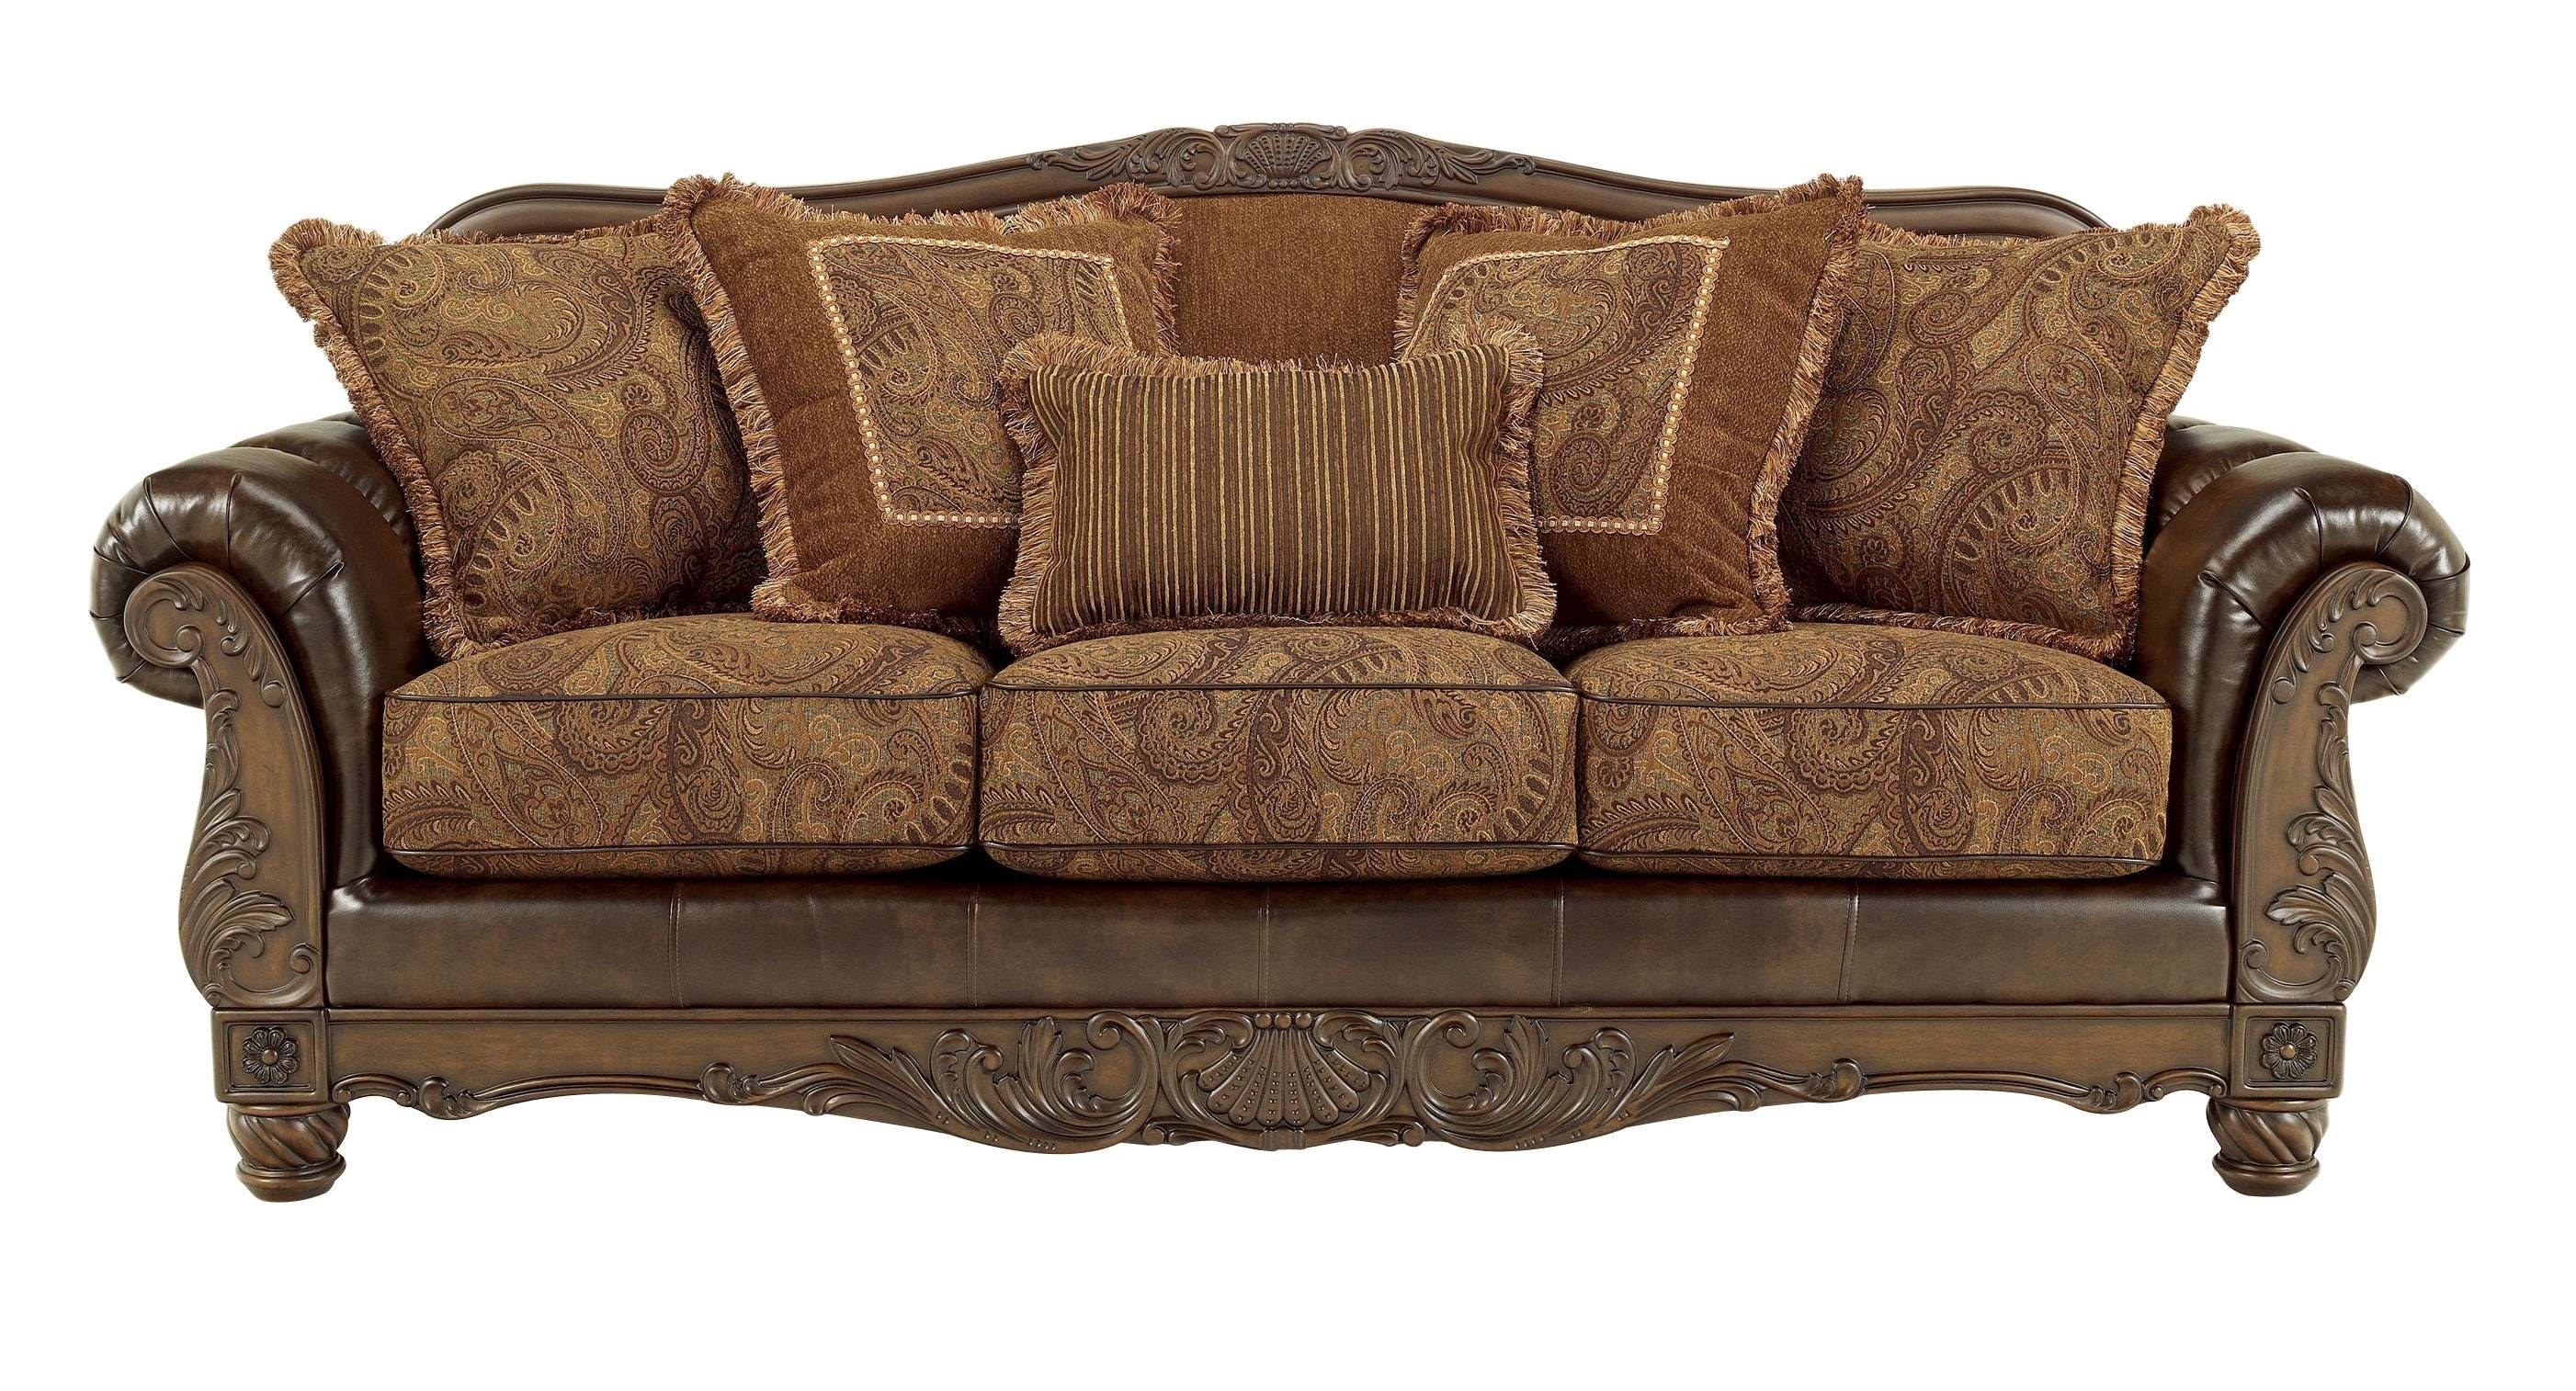 Fresco Durablend Traditional Antique Fabric Sofa | Living Rooms For Antique Sofa Chairs (View 1 of 30)